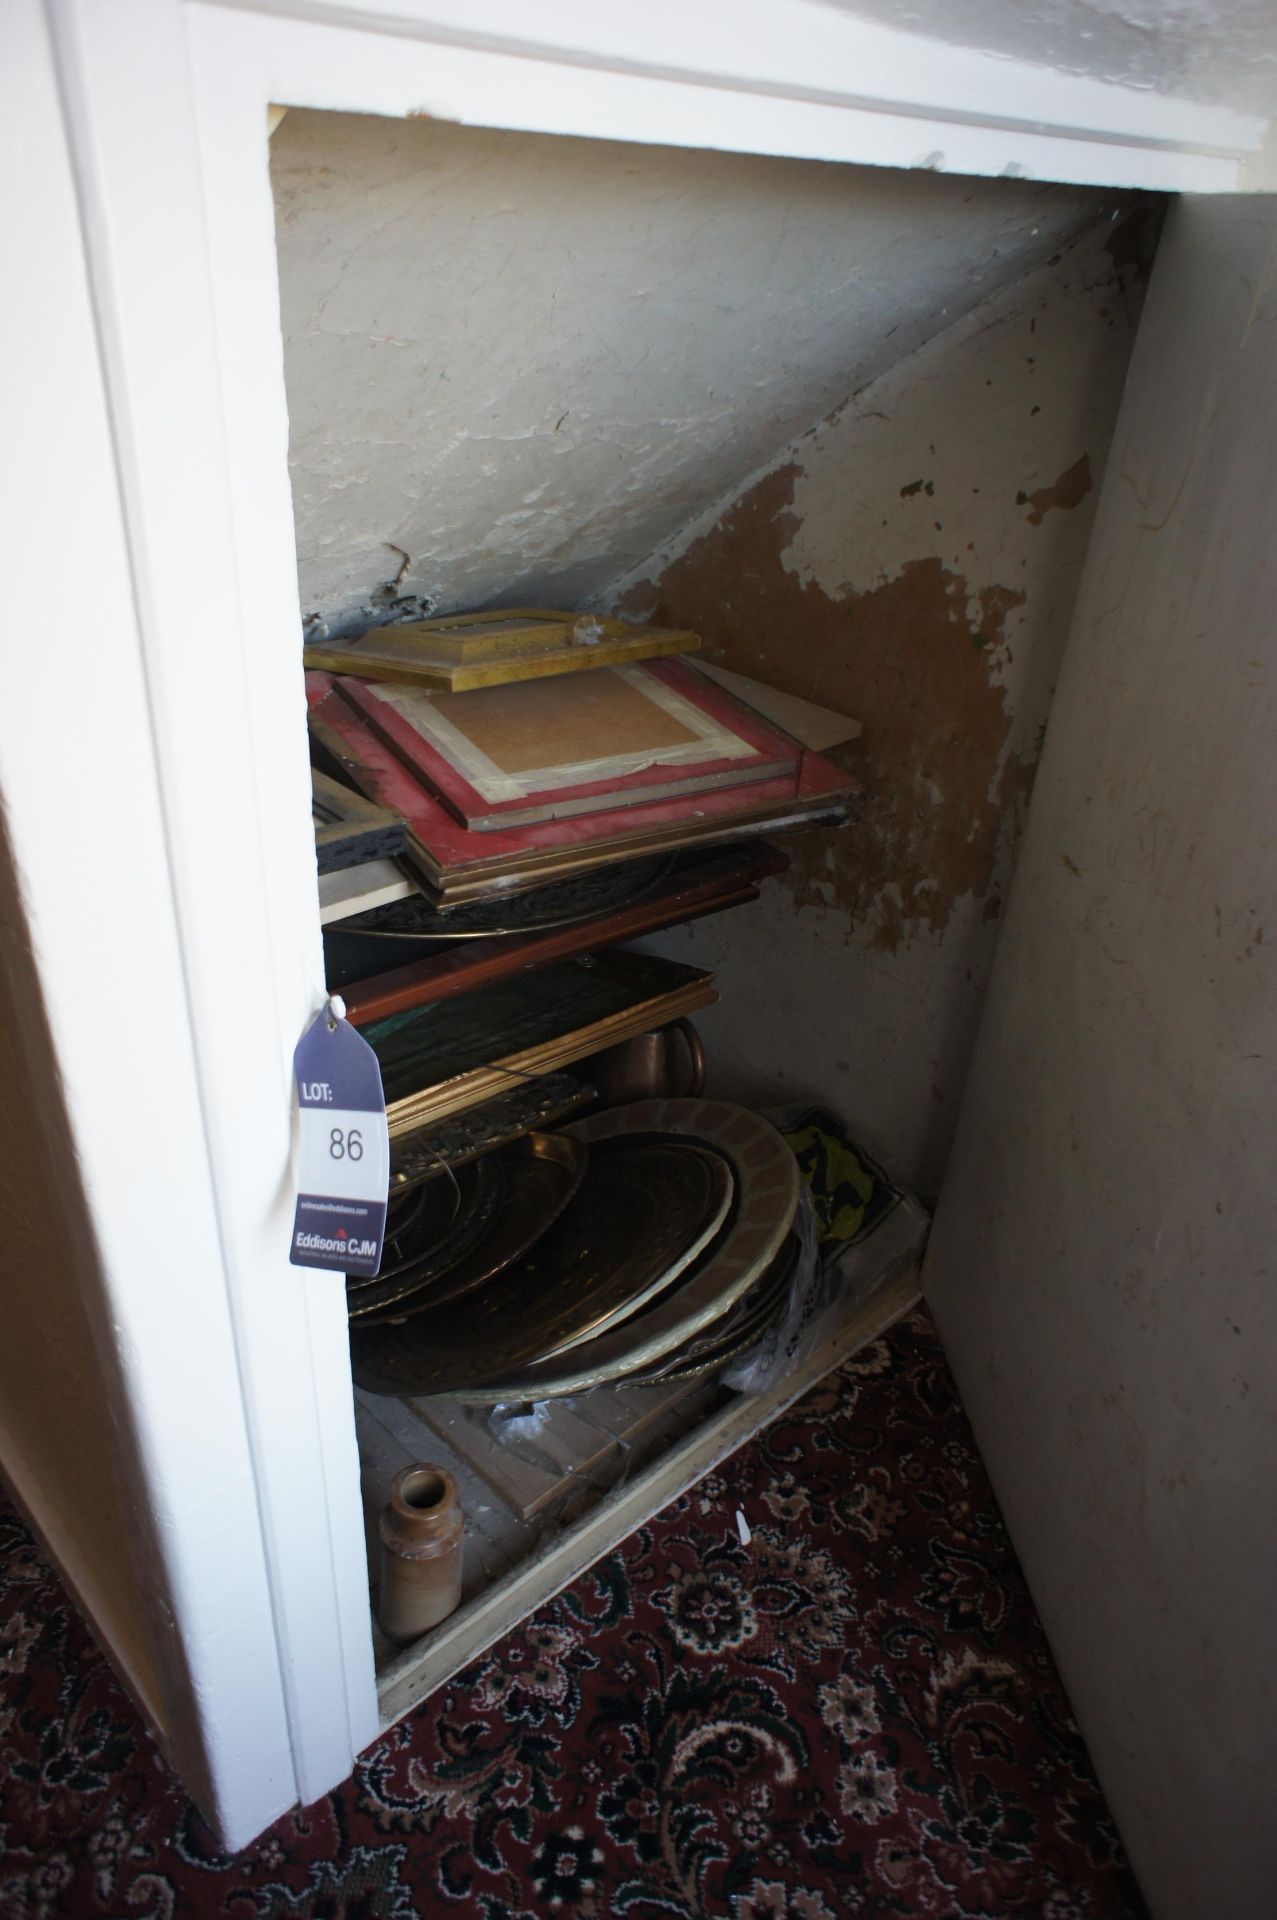 Loose contents of cupboard including Brass plates